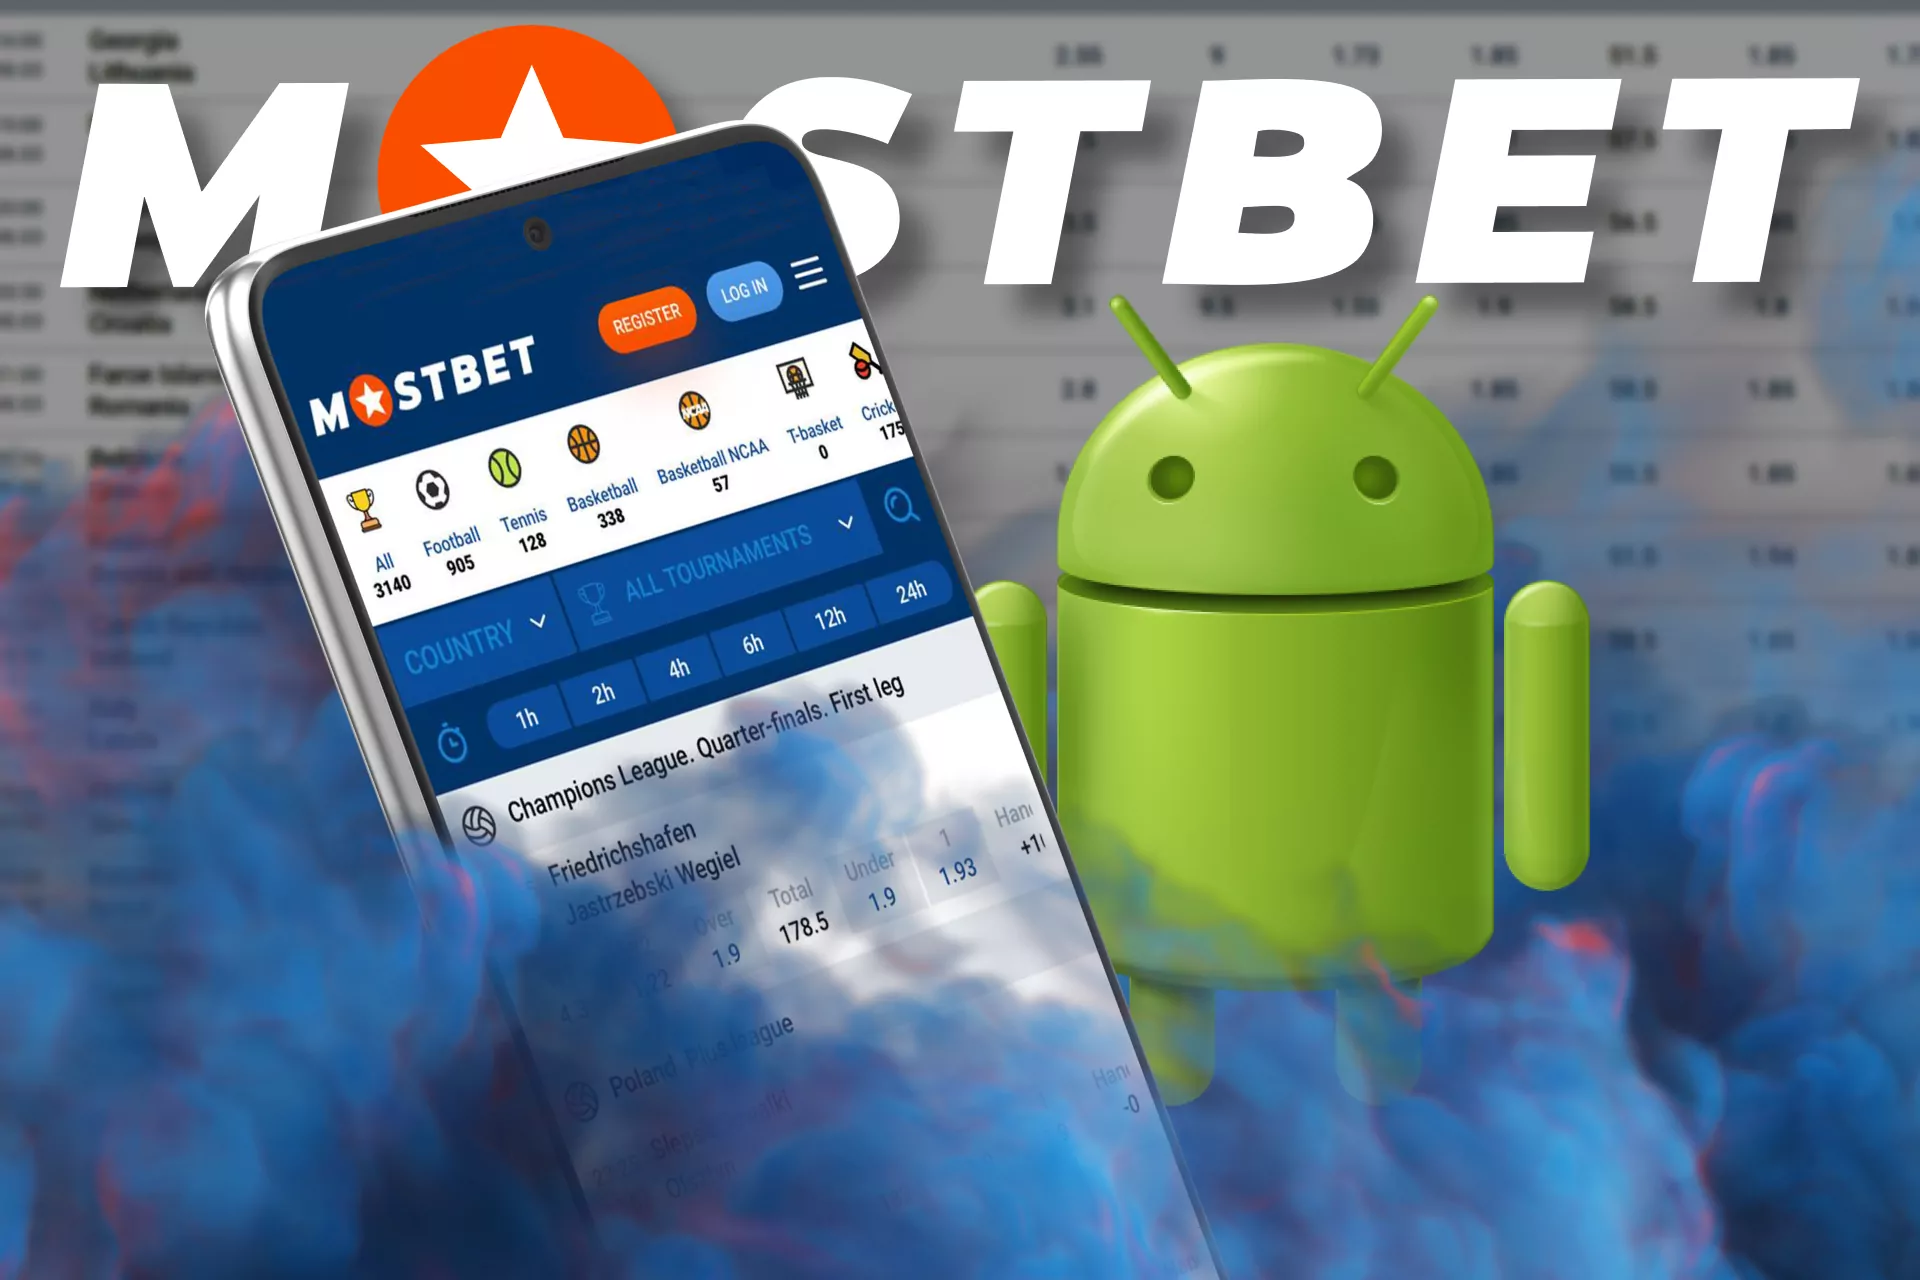 At Mostbet you can bet on your Android device.